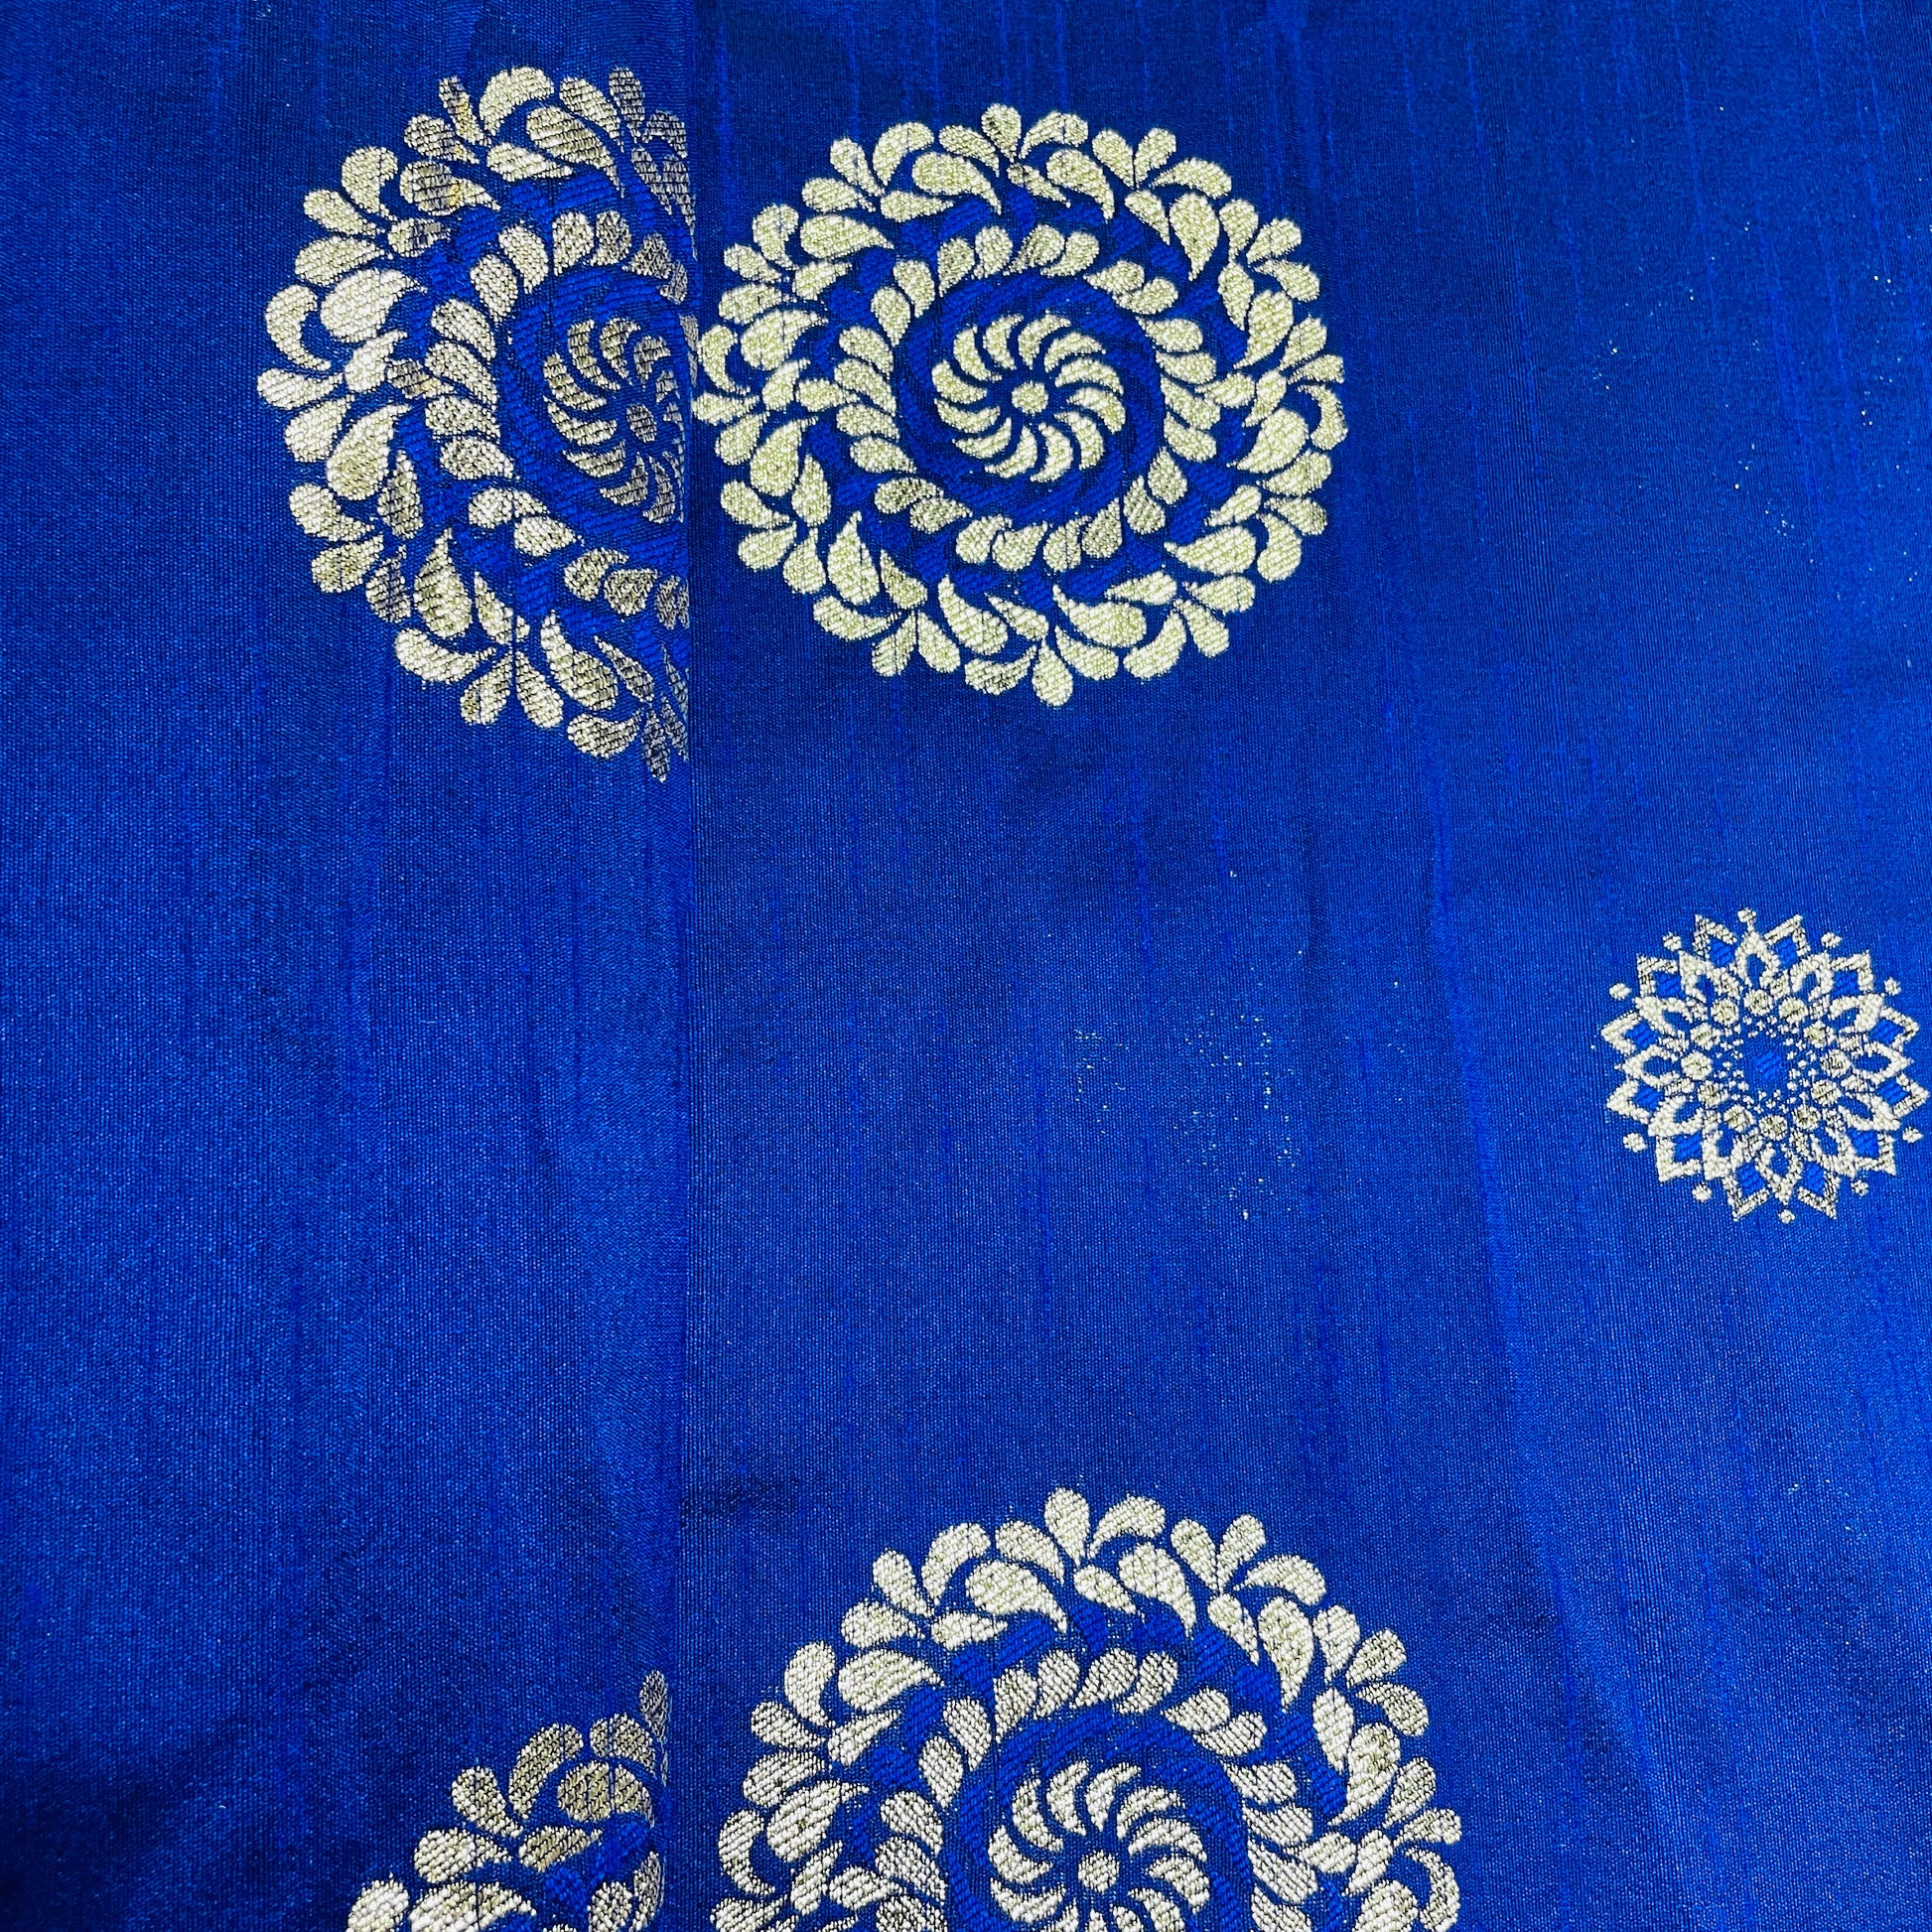 Embroidered Dupion Silk Blouse in Royal Blue : UVE72